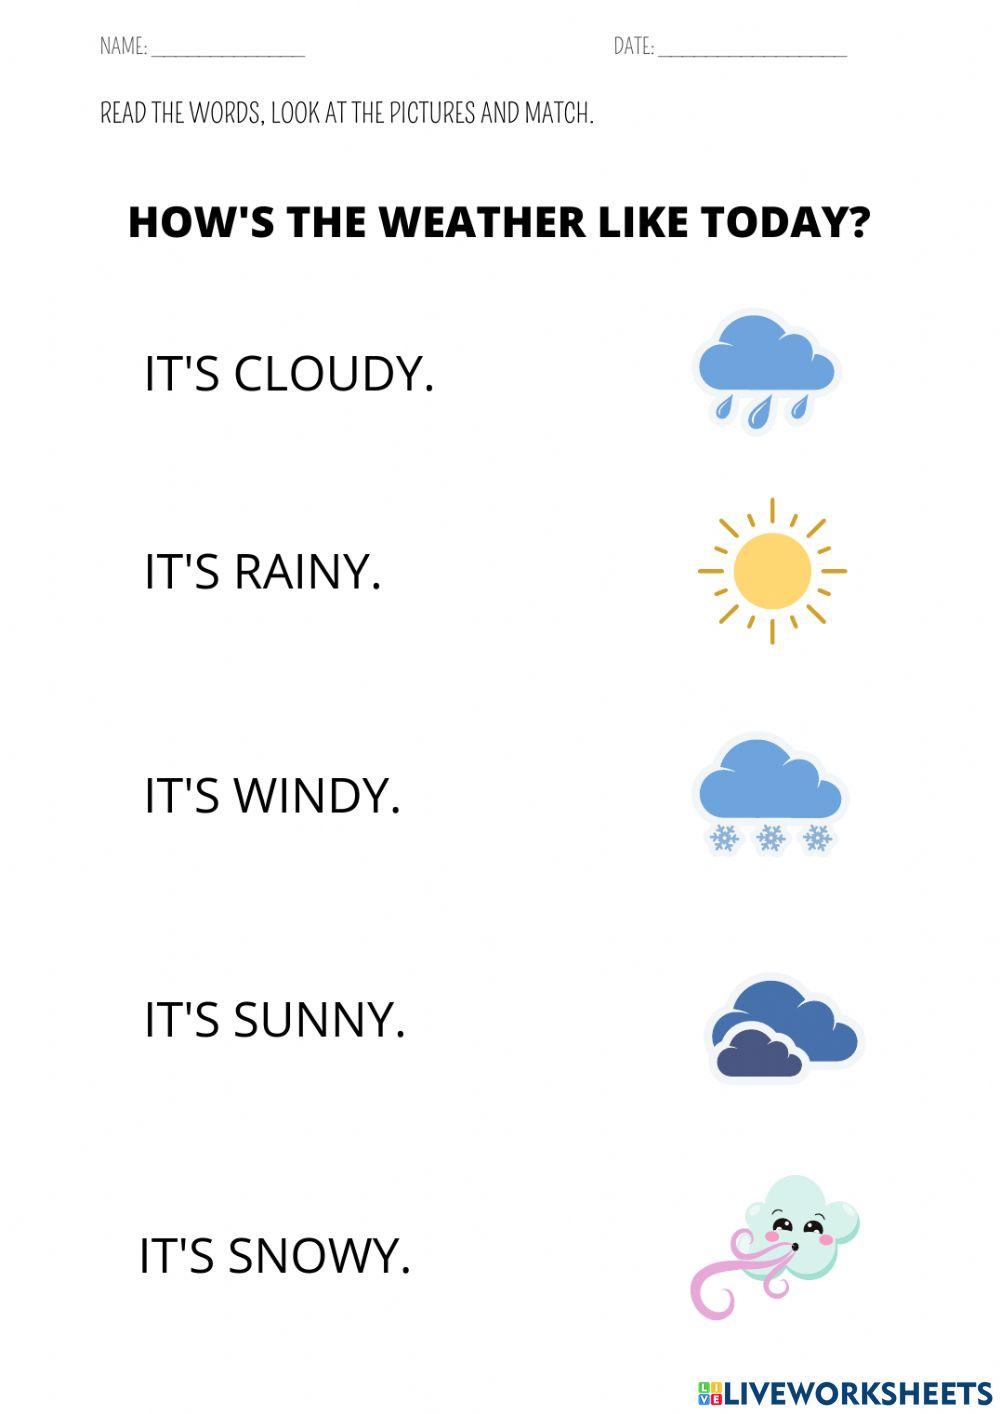 How's the weather like today?